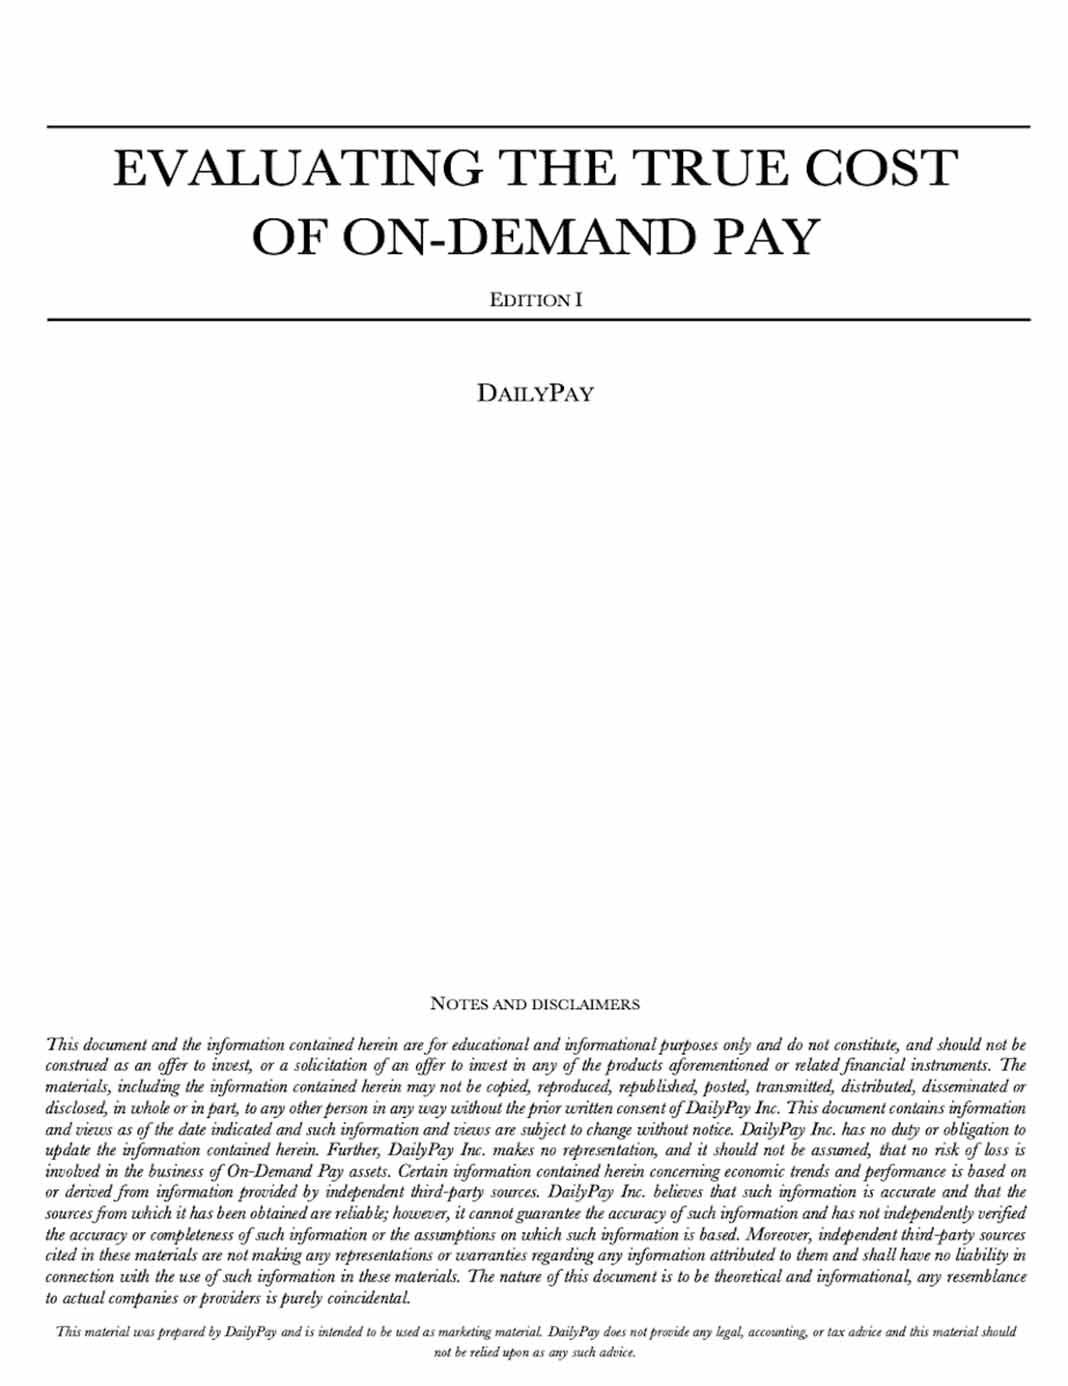 A document titled "Evaluating the True Cost of On-Demand Pay Edition I" by DailyPay. The document includes a subtitle "Notes and Disclaimers" explaining that the content is for informational purposes only and should not be considered official financial advice.